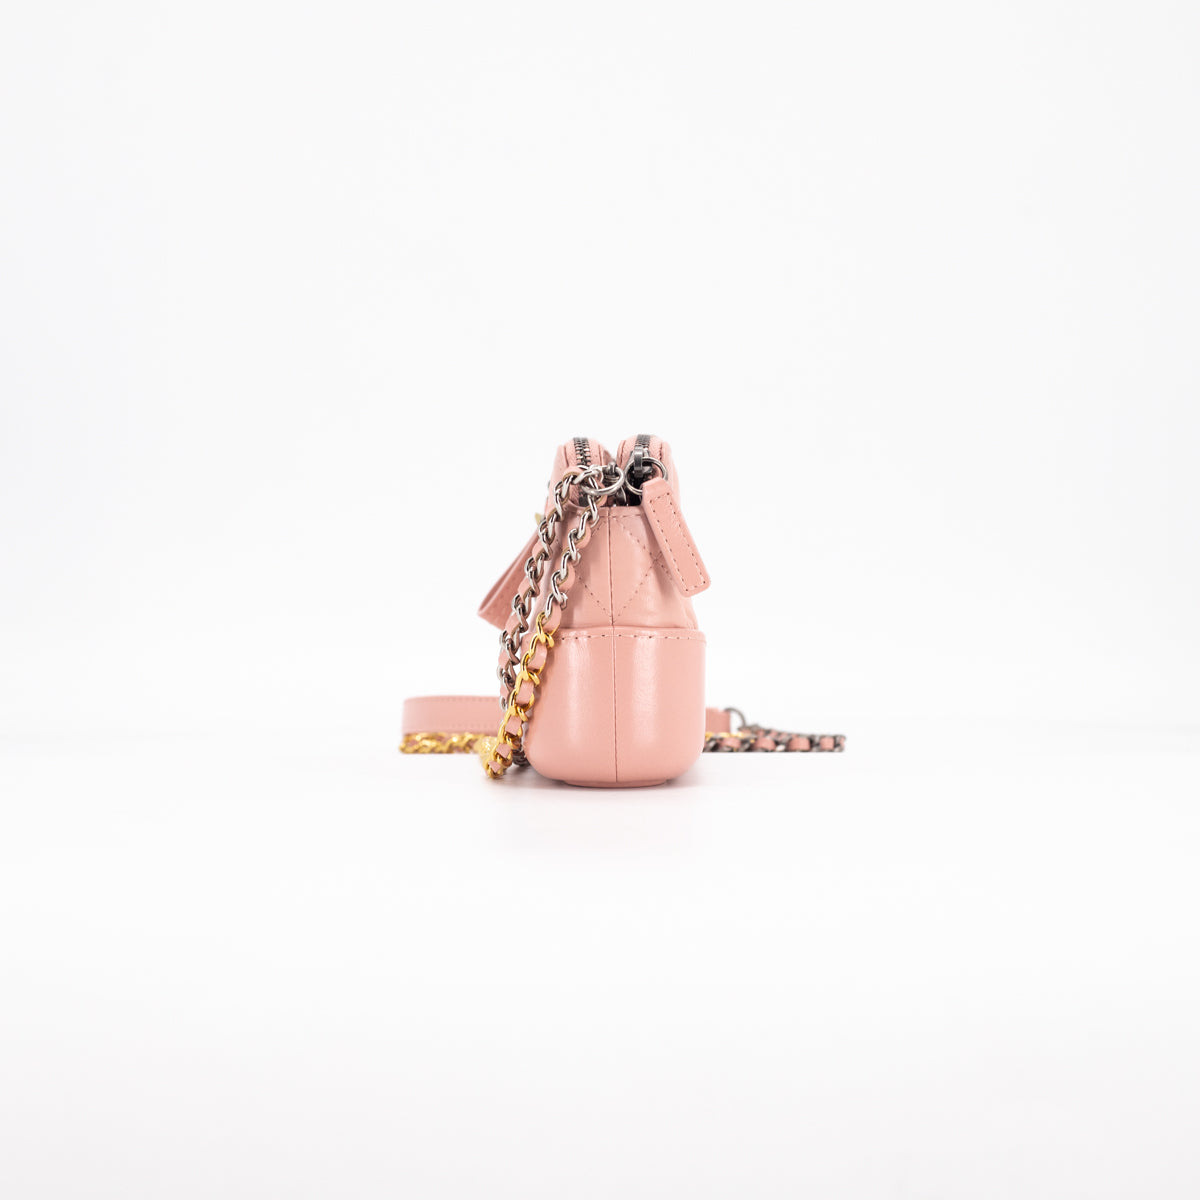 Chanel Quilted Calfskin Gabrielle Clutch On Chain Light Pink - THE